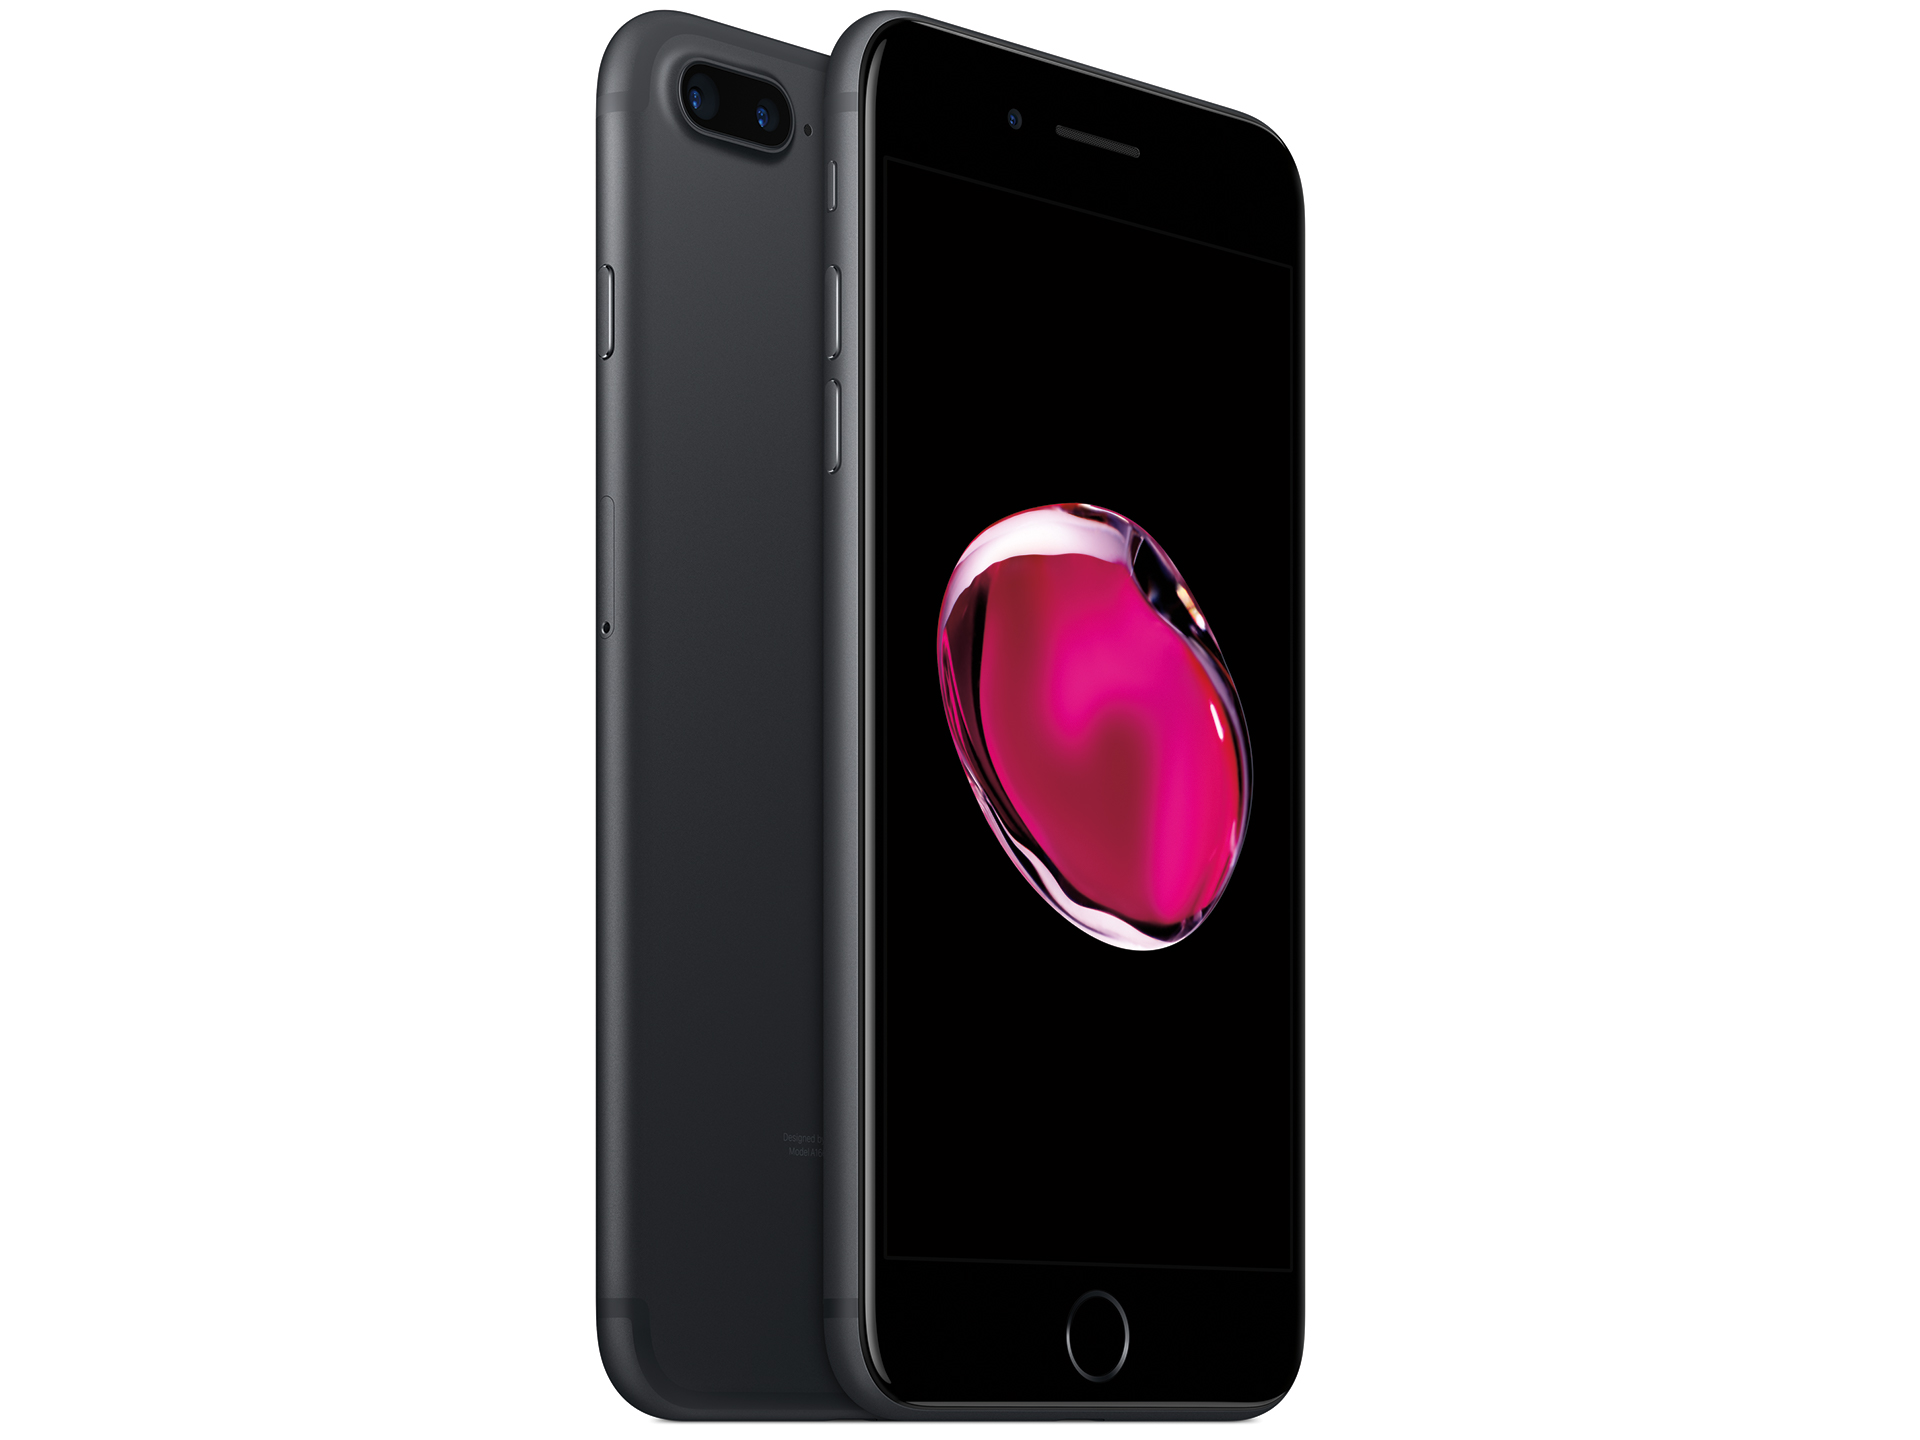 Apple Iphone 7 Plus Smartphone Review Notebookchecknet Reviews